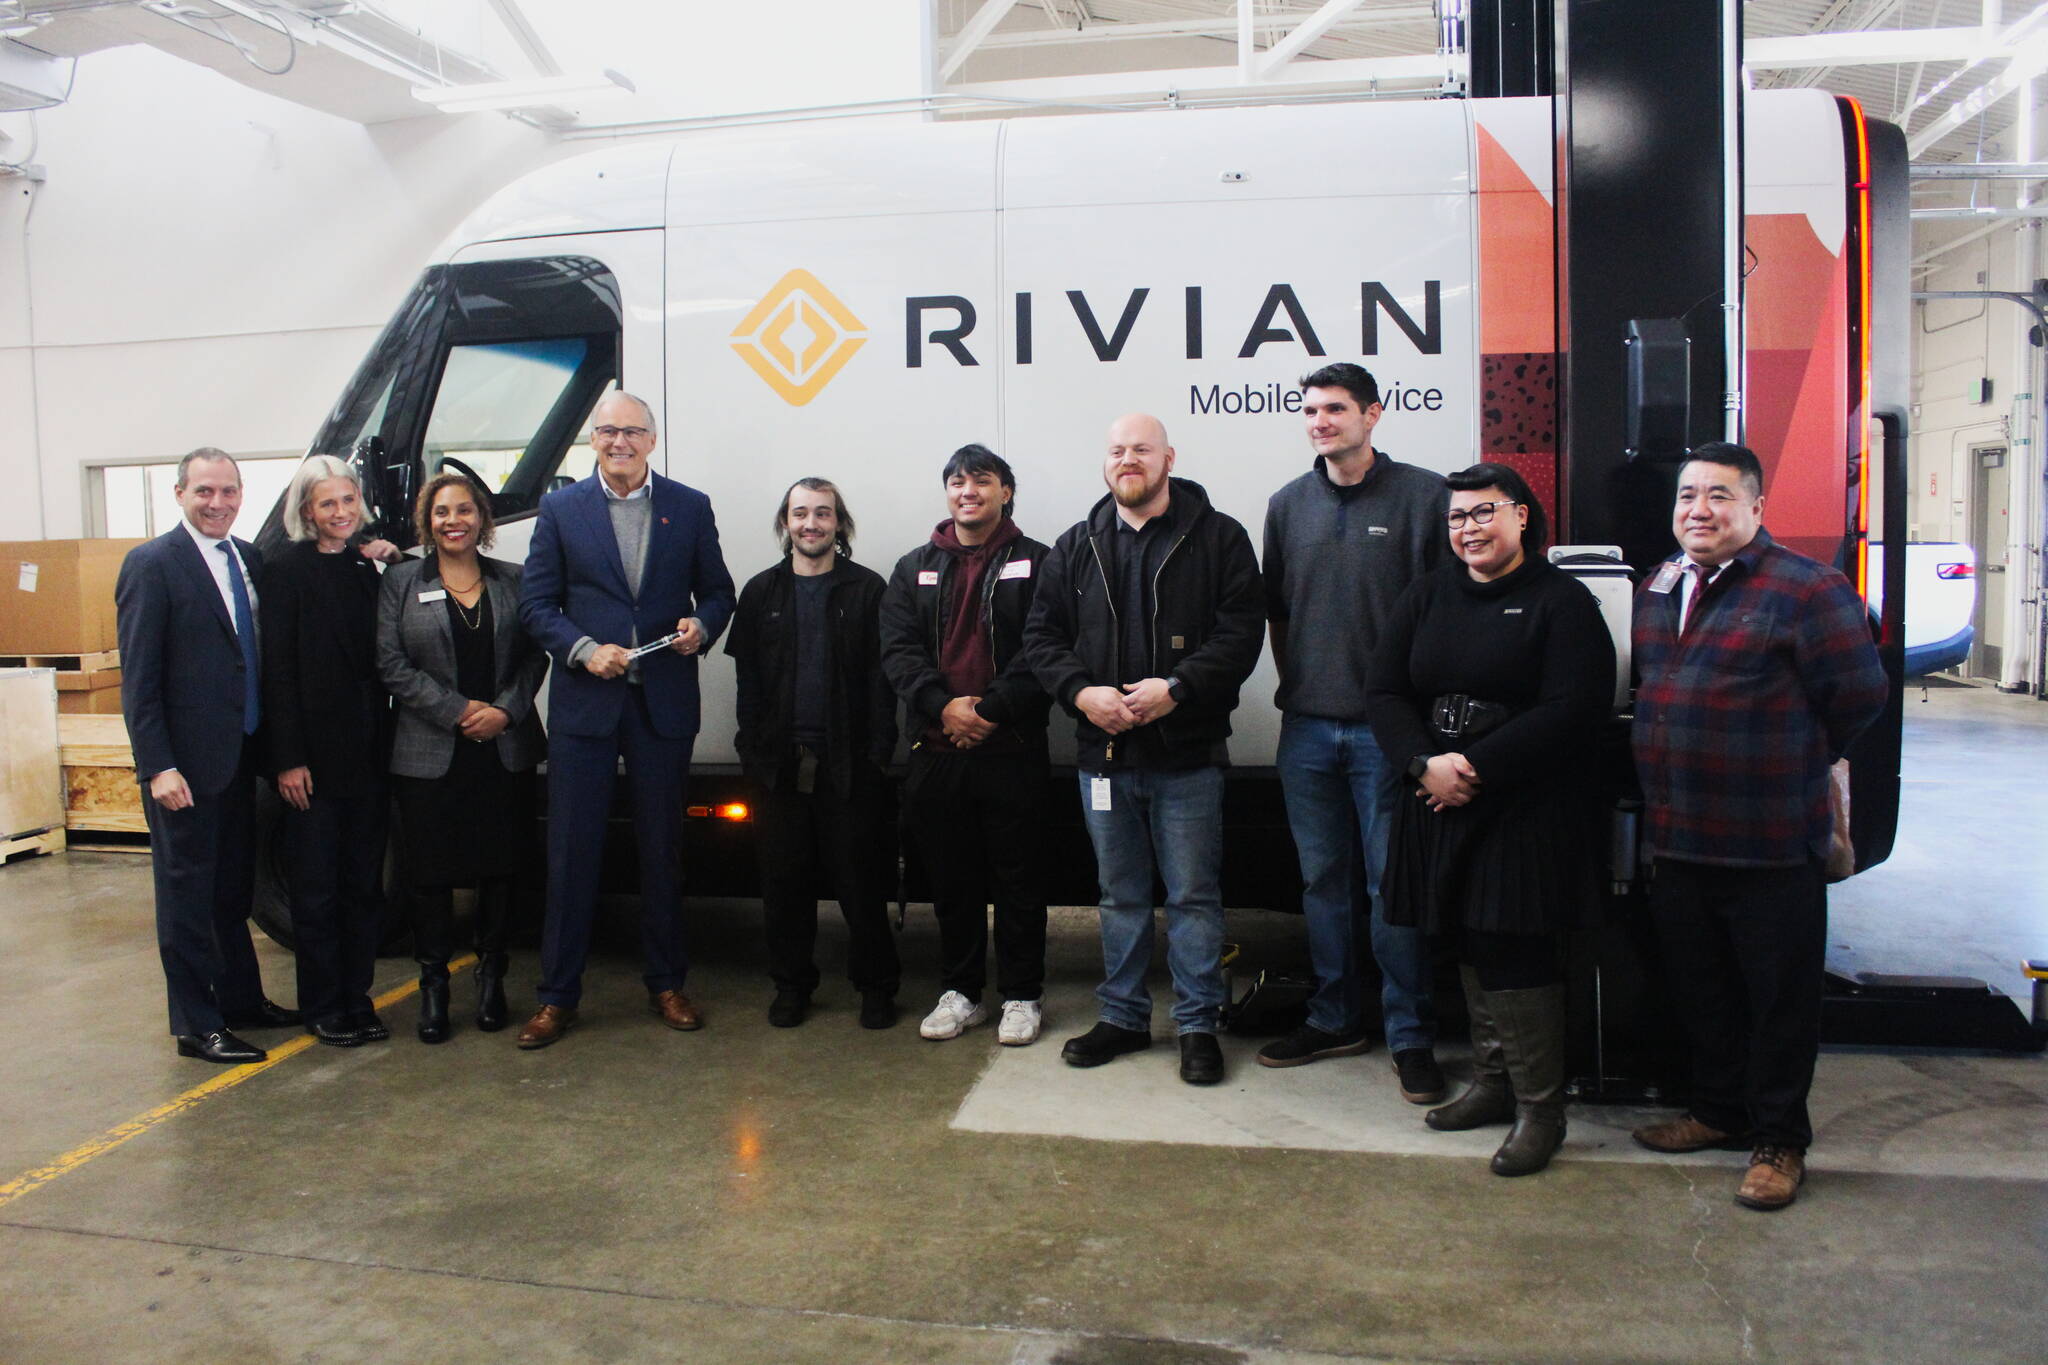 Gov. Jay Inslee, along with Rivian associates, Renton Technical College staff and RTC students in front of a Rivian mobile service vehicle after the governor toured the new program space. Photo by Bailey Jo Josie/Sound Publishing.